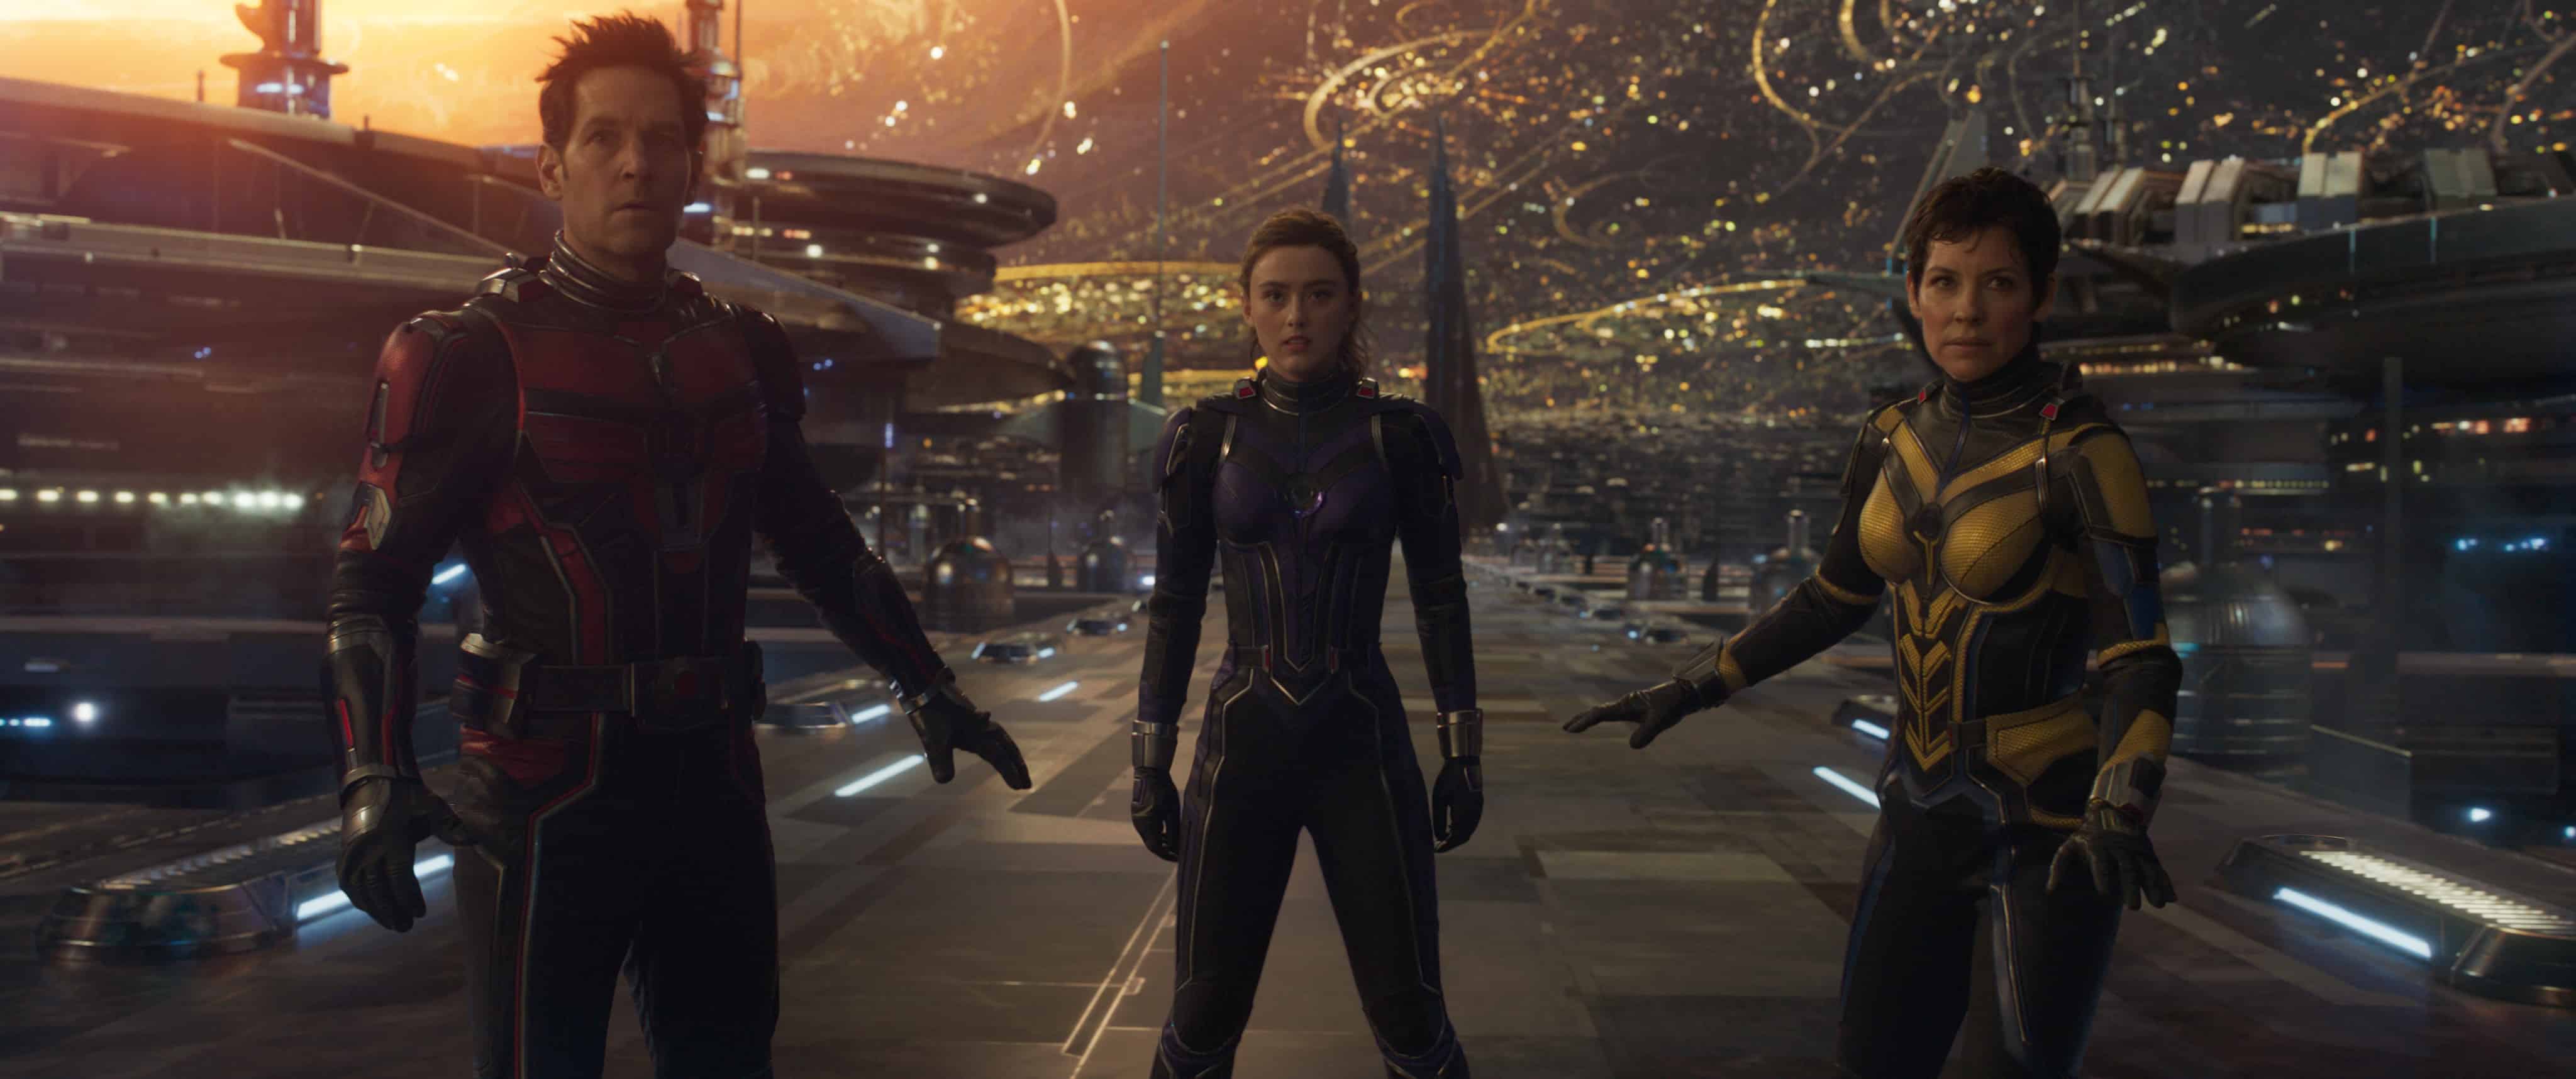 Grab Your Passes to See Ant-Man and the Wasp: Quantumania